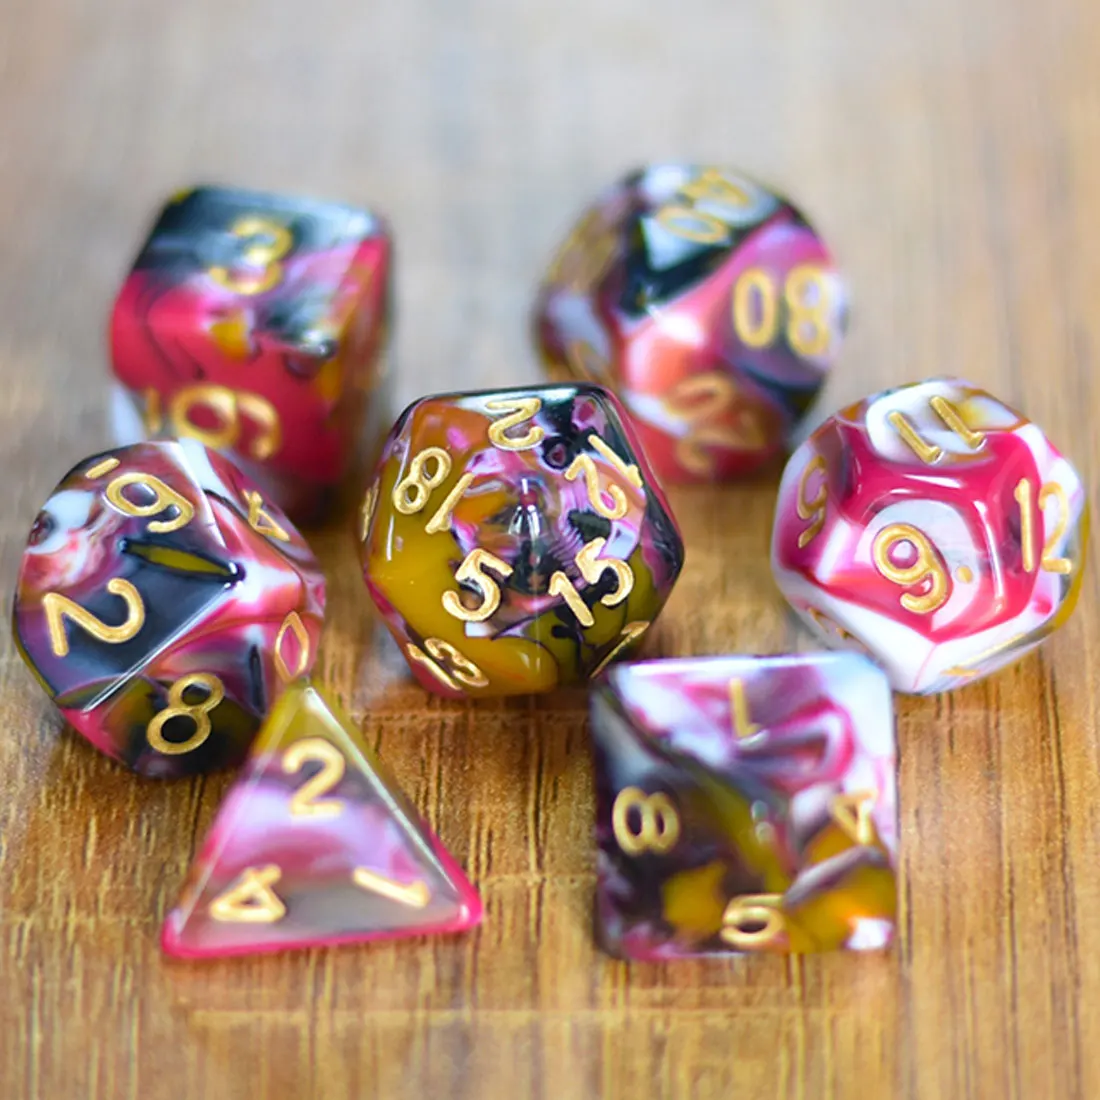 

DND Dice Set D4 D6 D8 D10 D% D12 D20 Four Color Mixing Polyhedral Dice for Dungeons and Dragon Role Playing Board Game D&D RPG